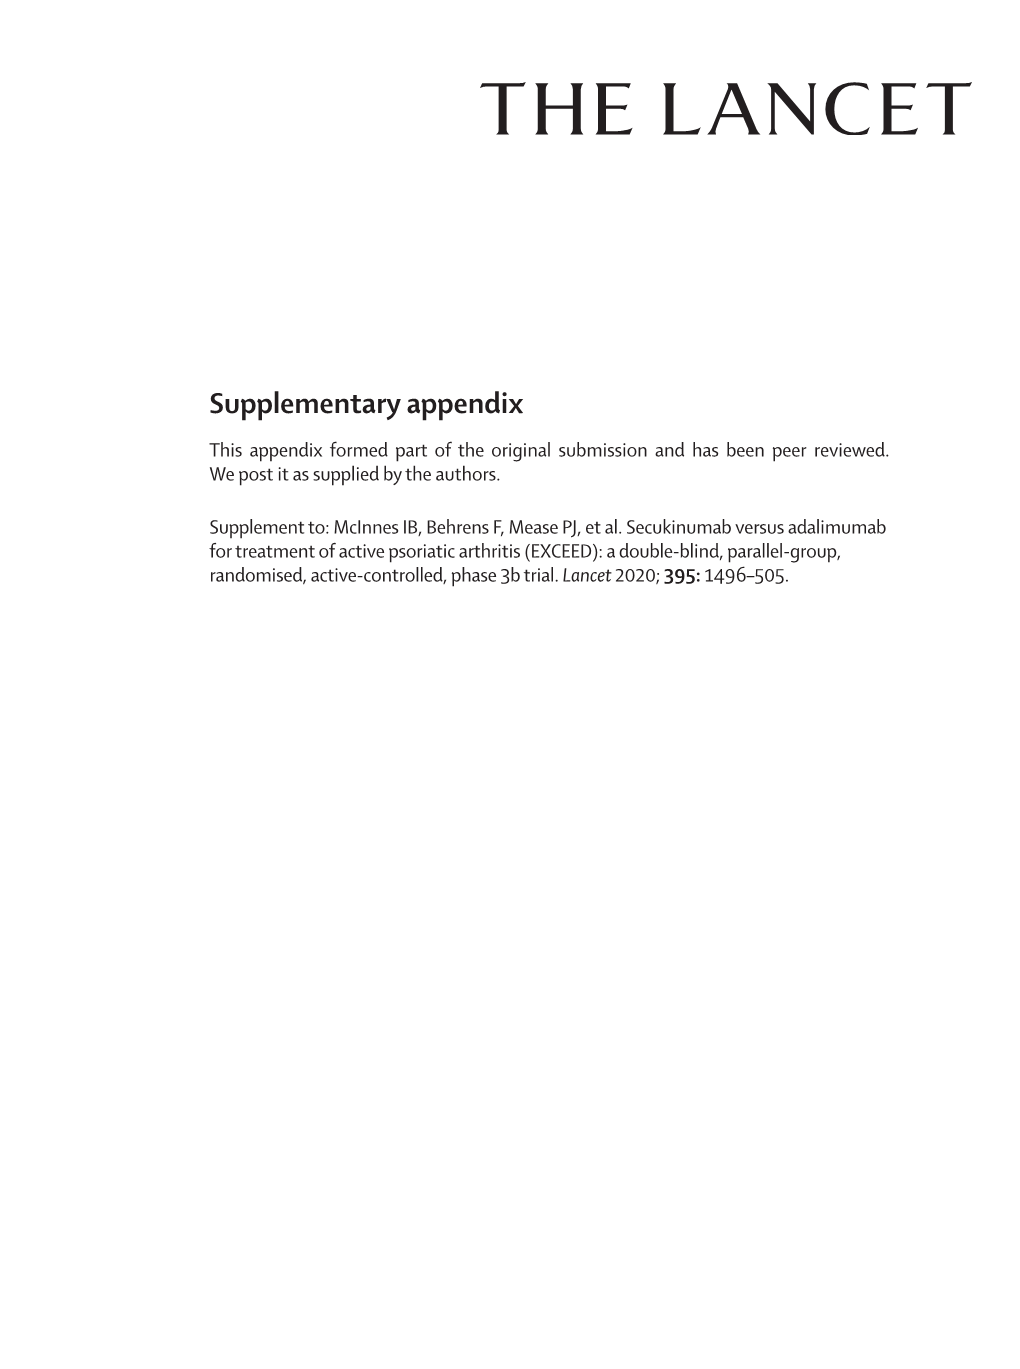 Supplementary Appendix This Appendix Formed Part of the Original Submission and Has Been Peer Reviewed